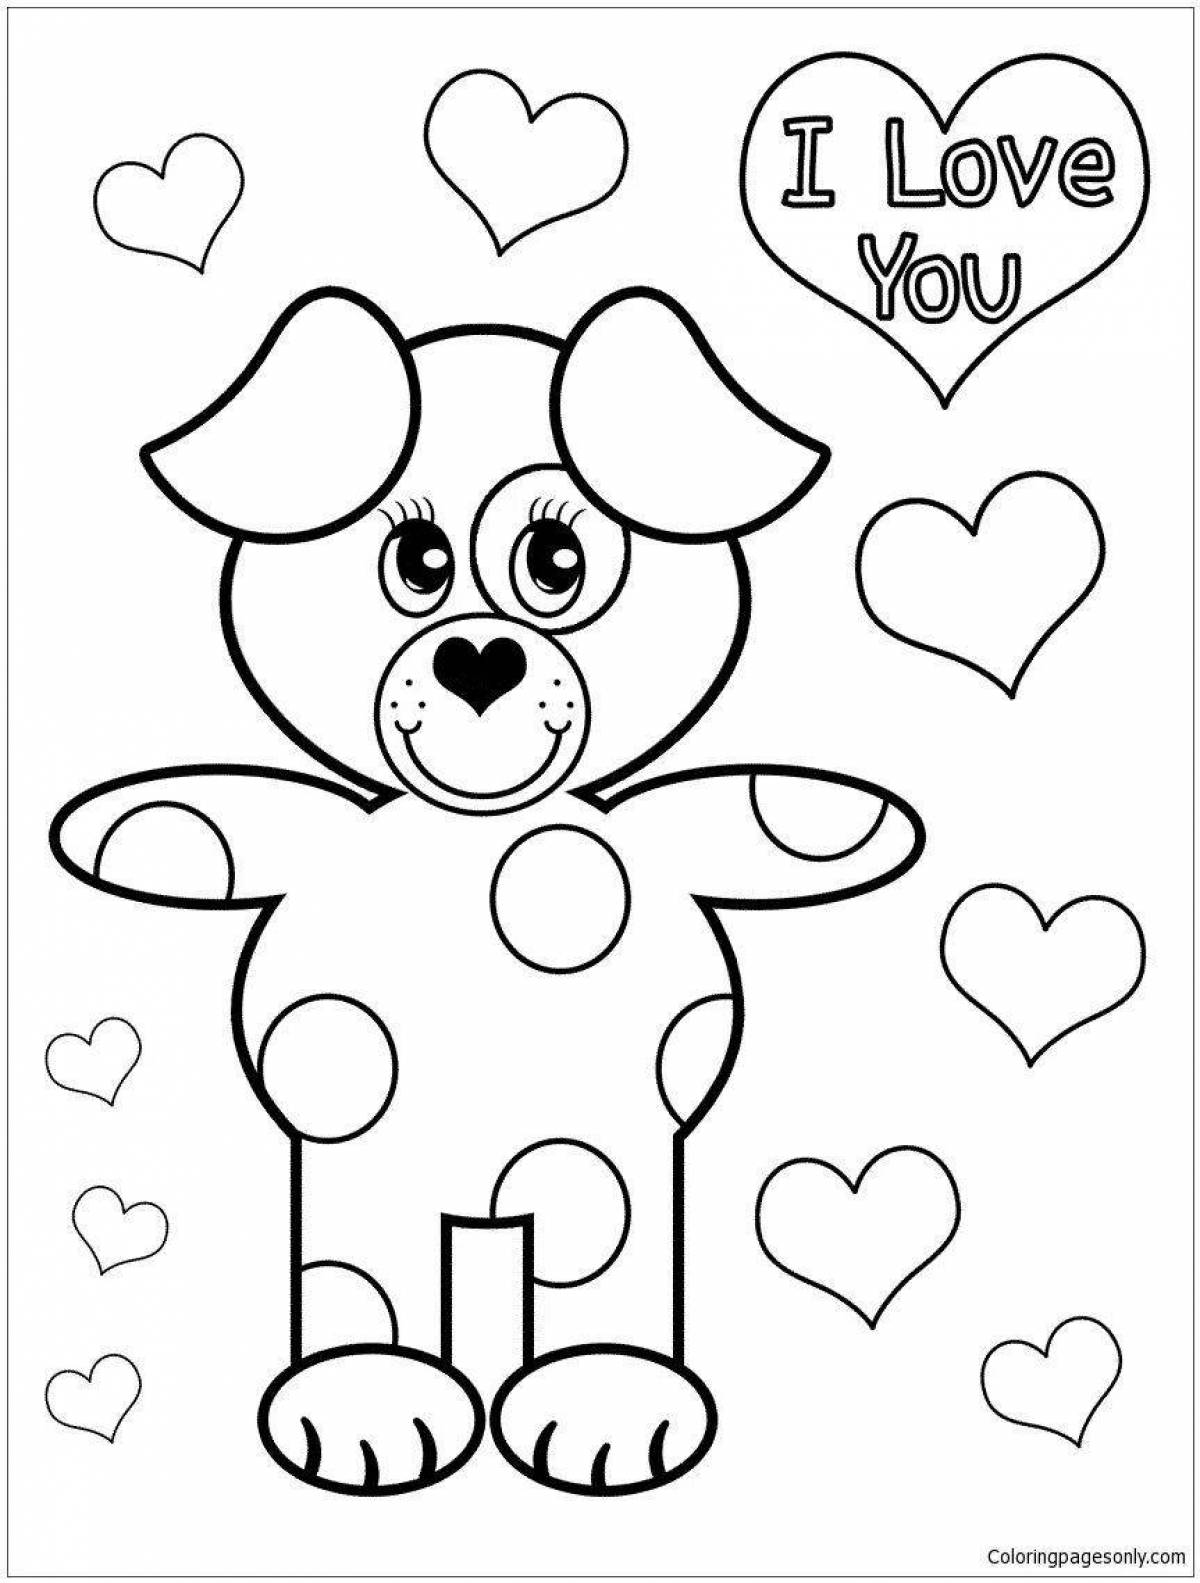 Playful teddy bear with heart coloring book